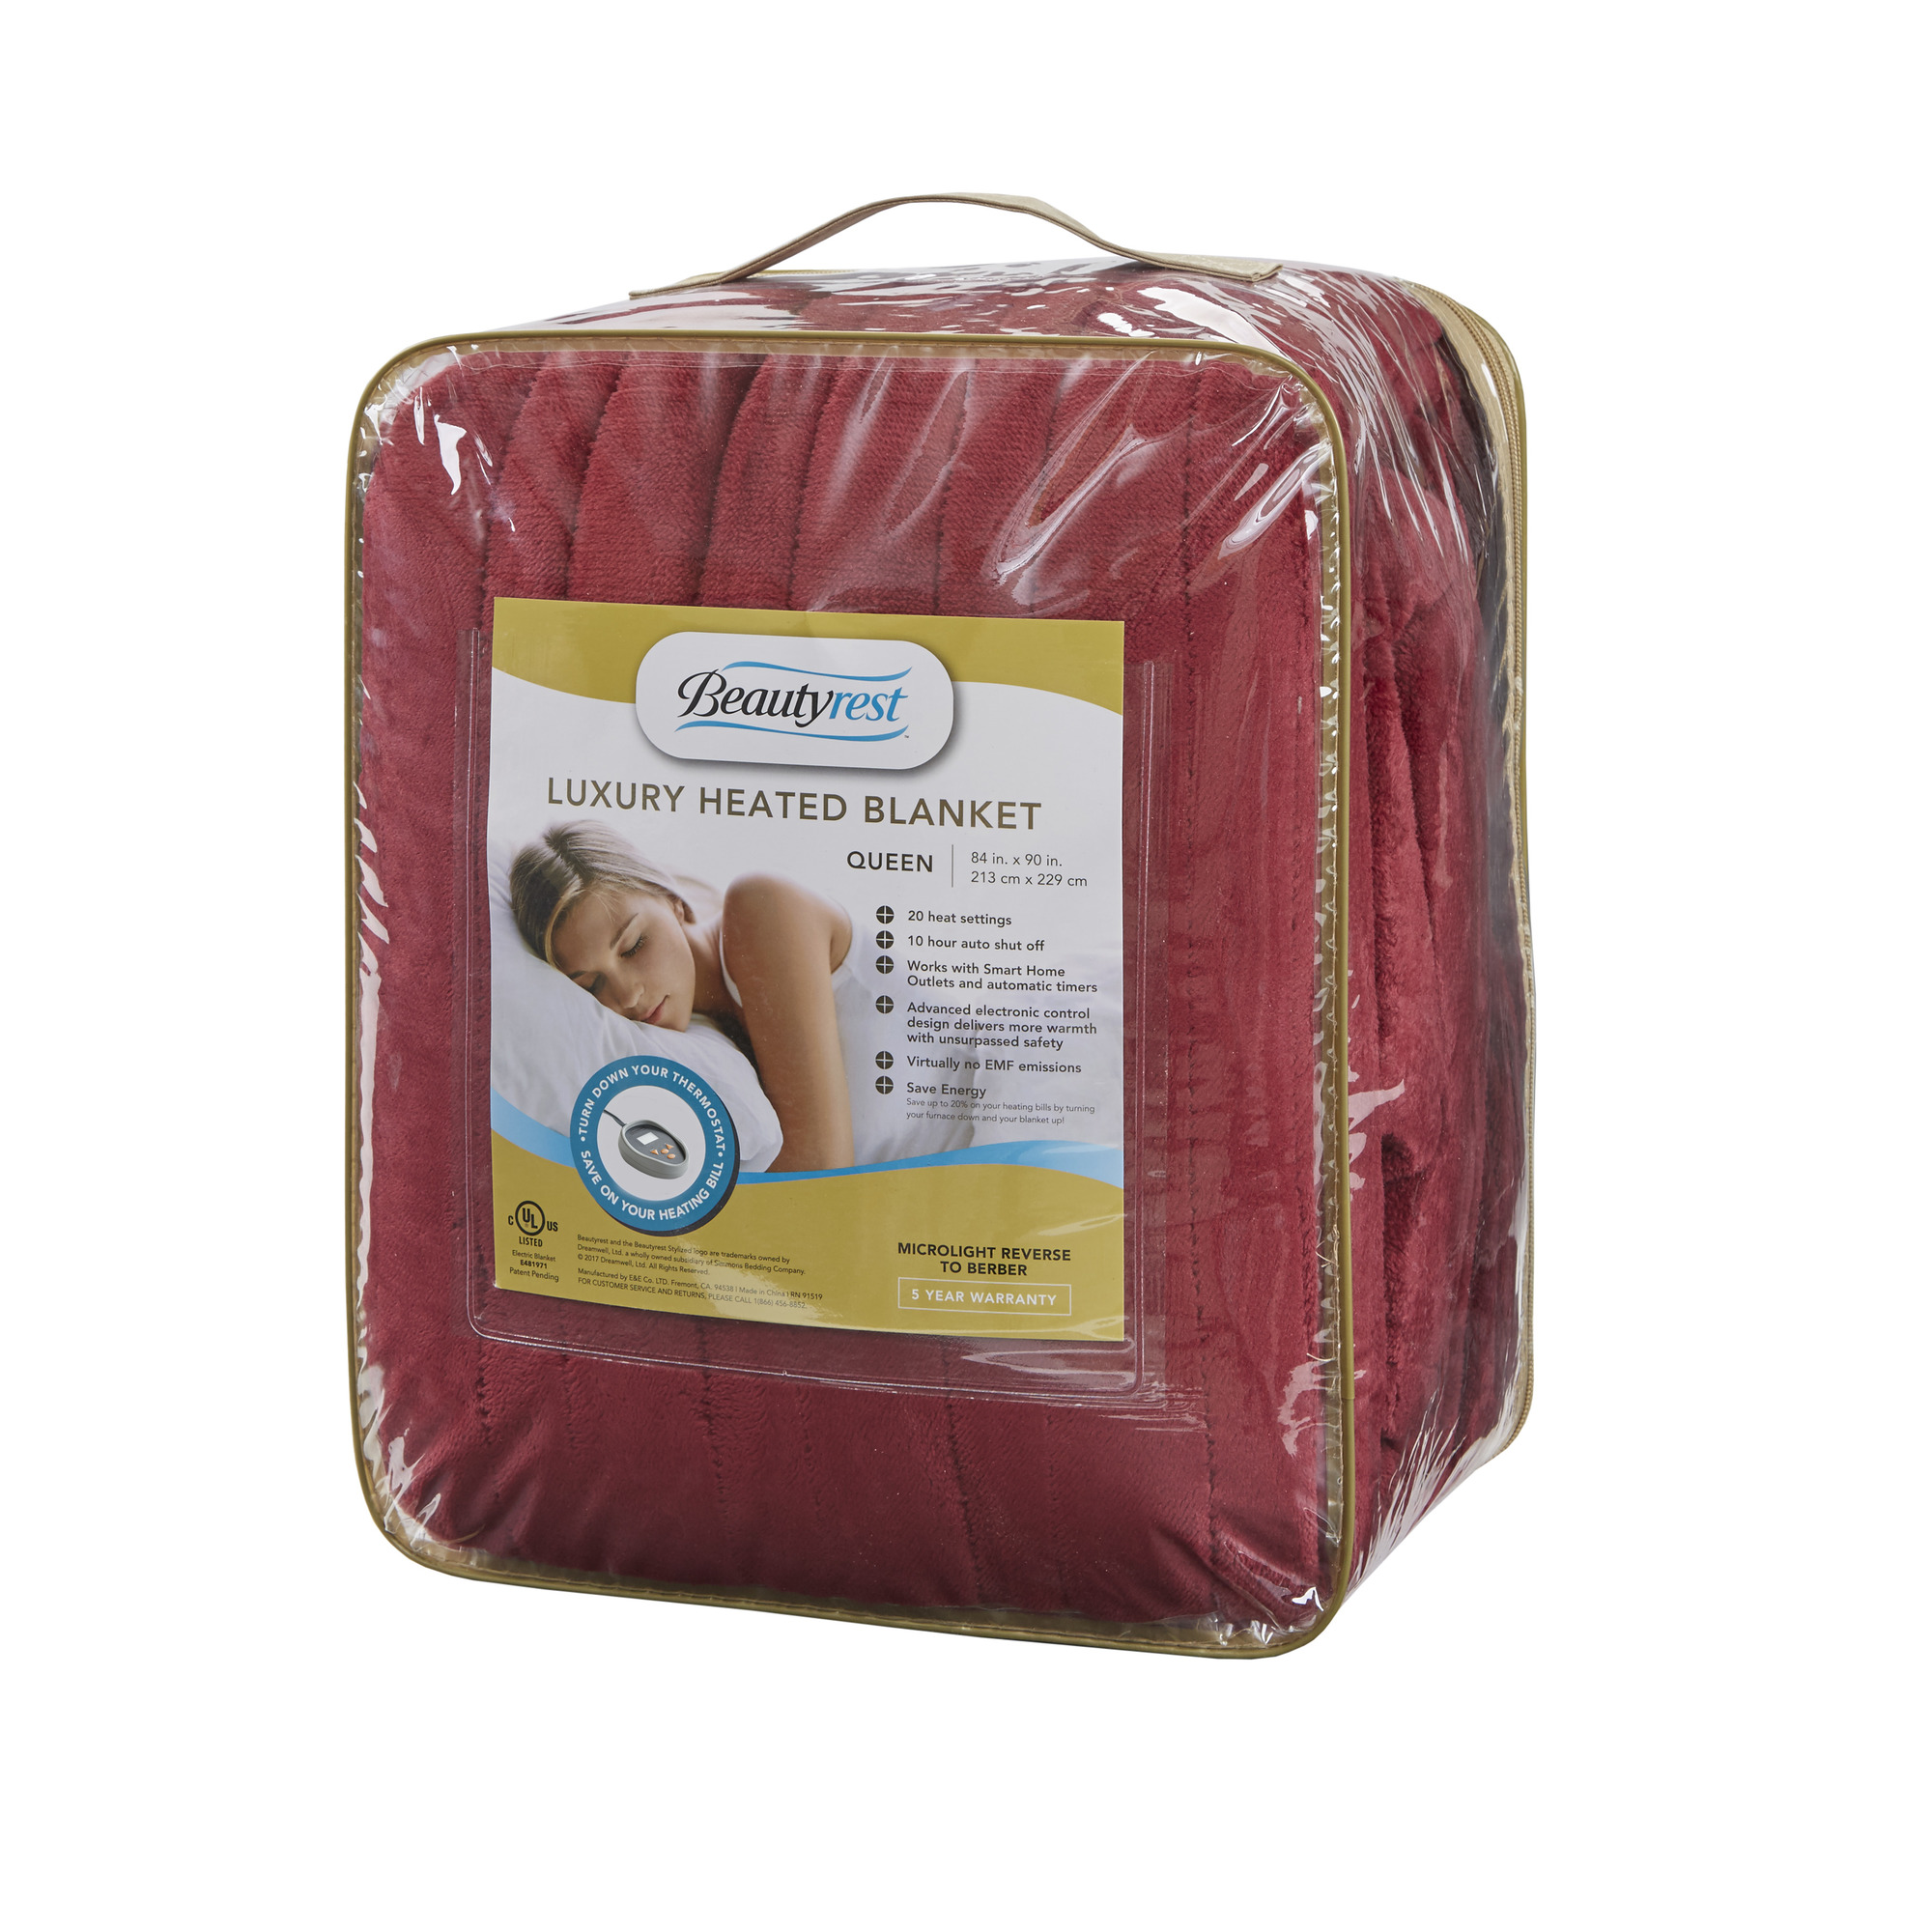 Beautyrest Heated Microlight to Berber Solid Blanket, Full, Red - image 3 of 13